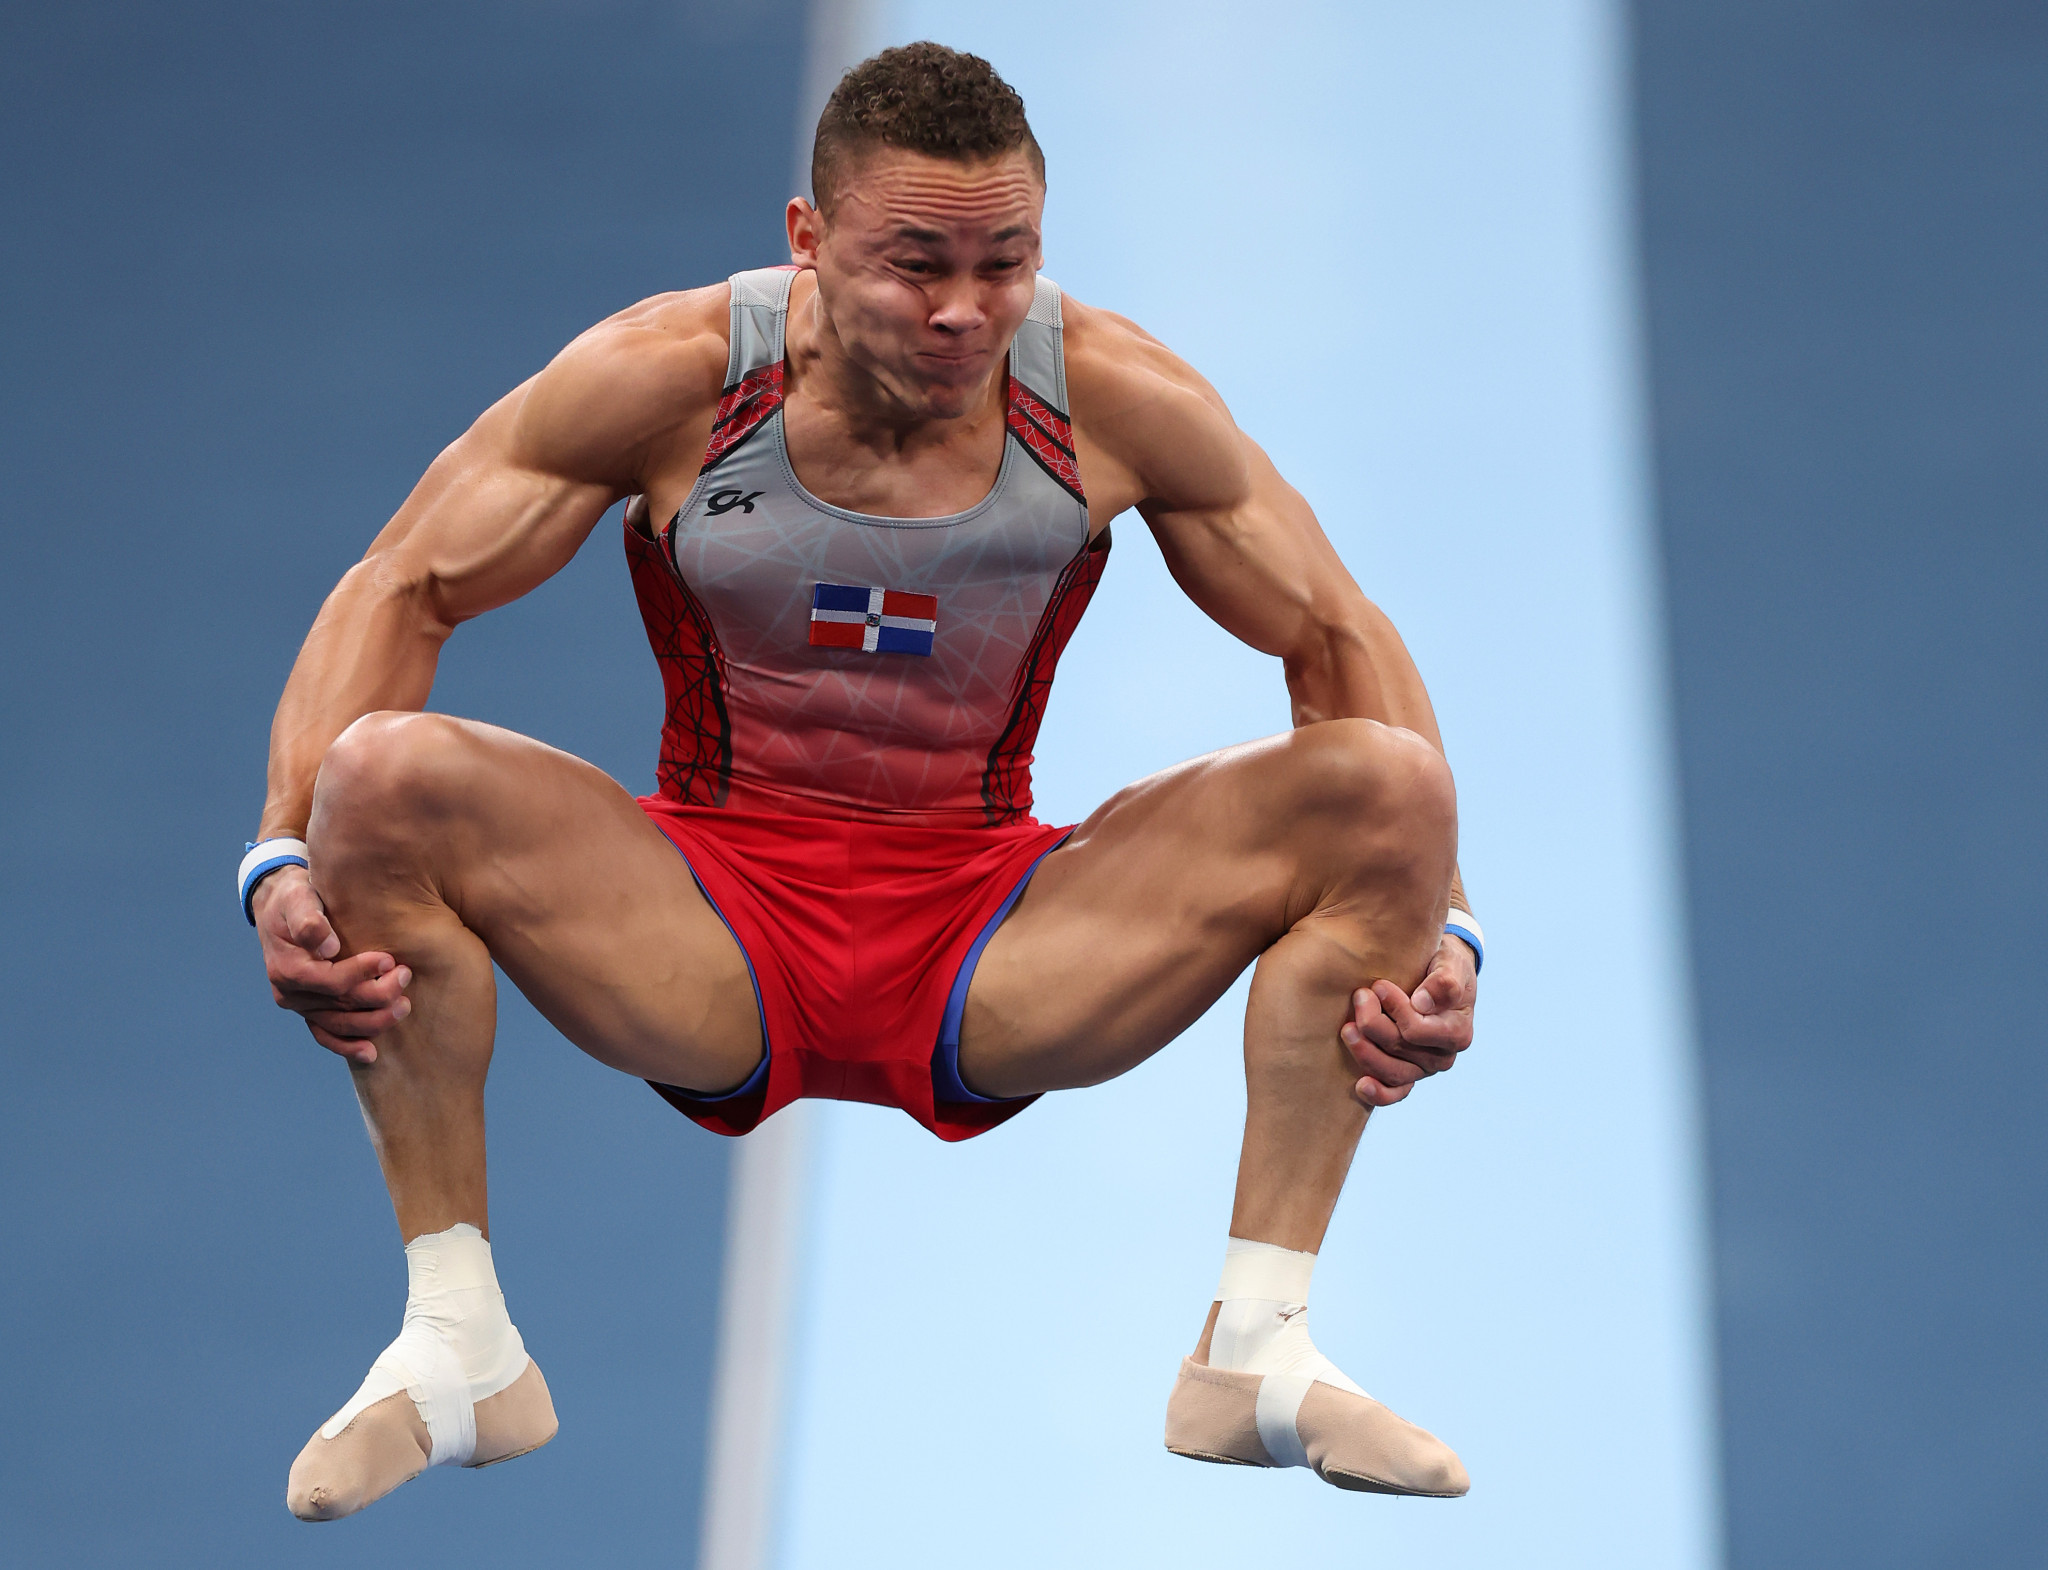 Audrys Nin Reyes defended his men's vault title ©Getty Images